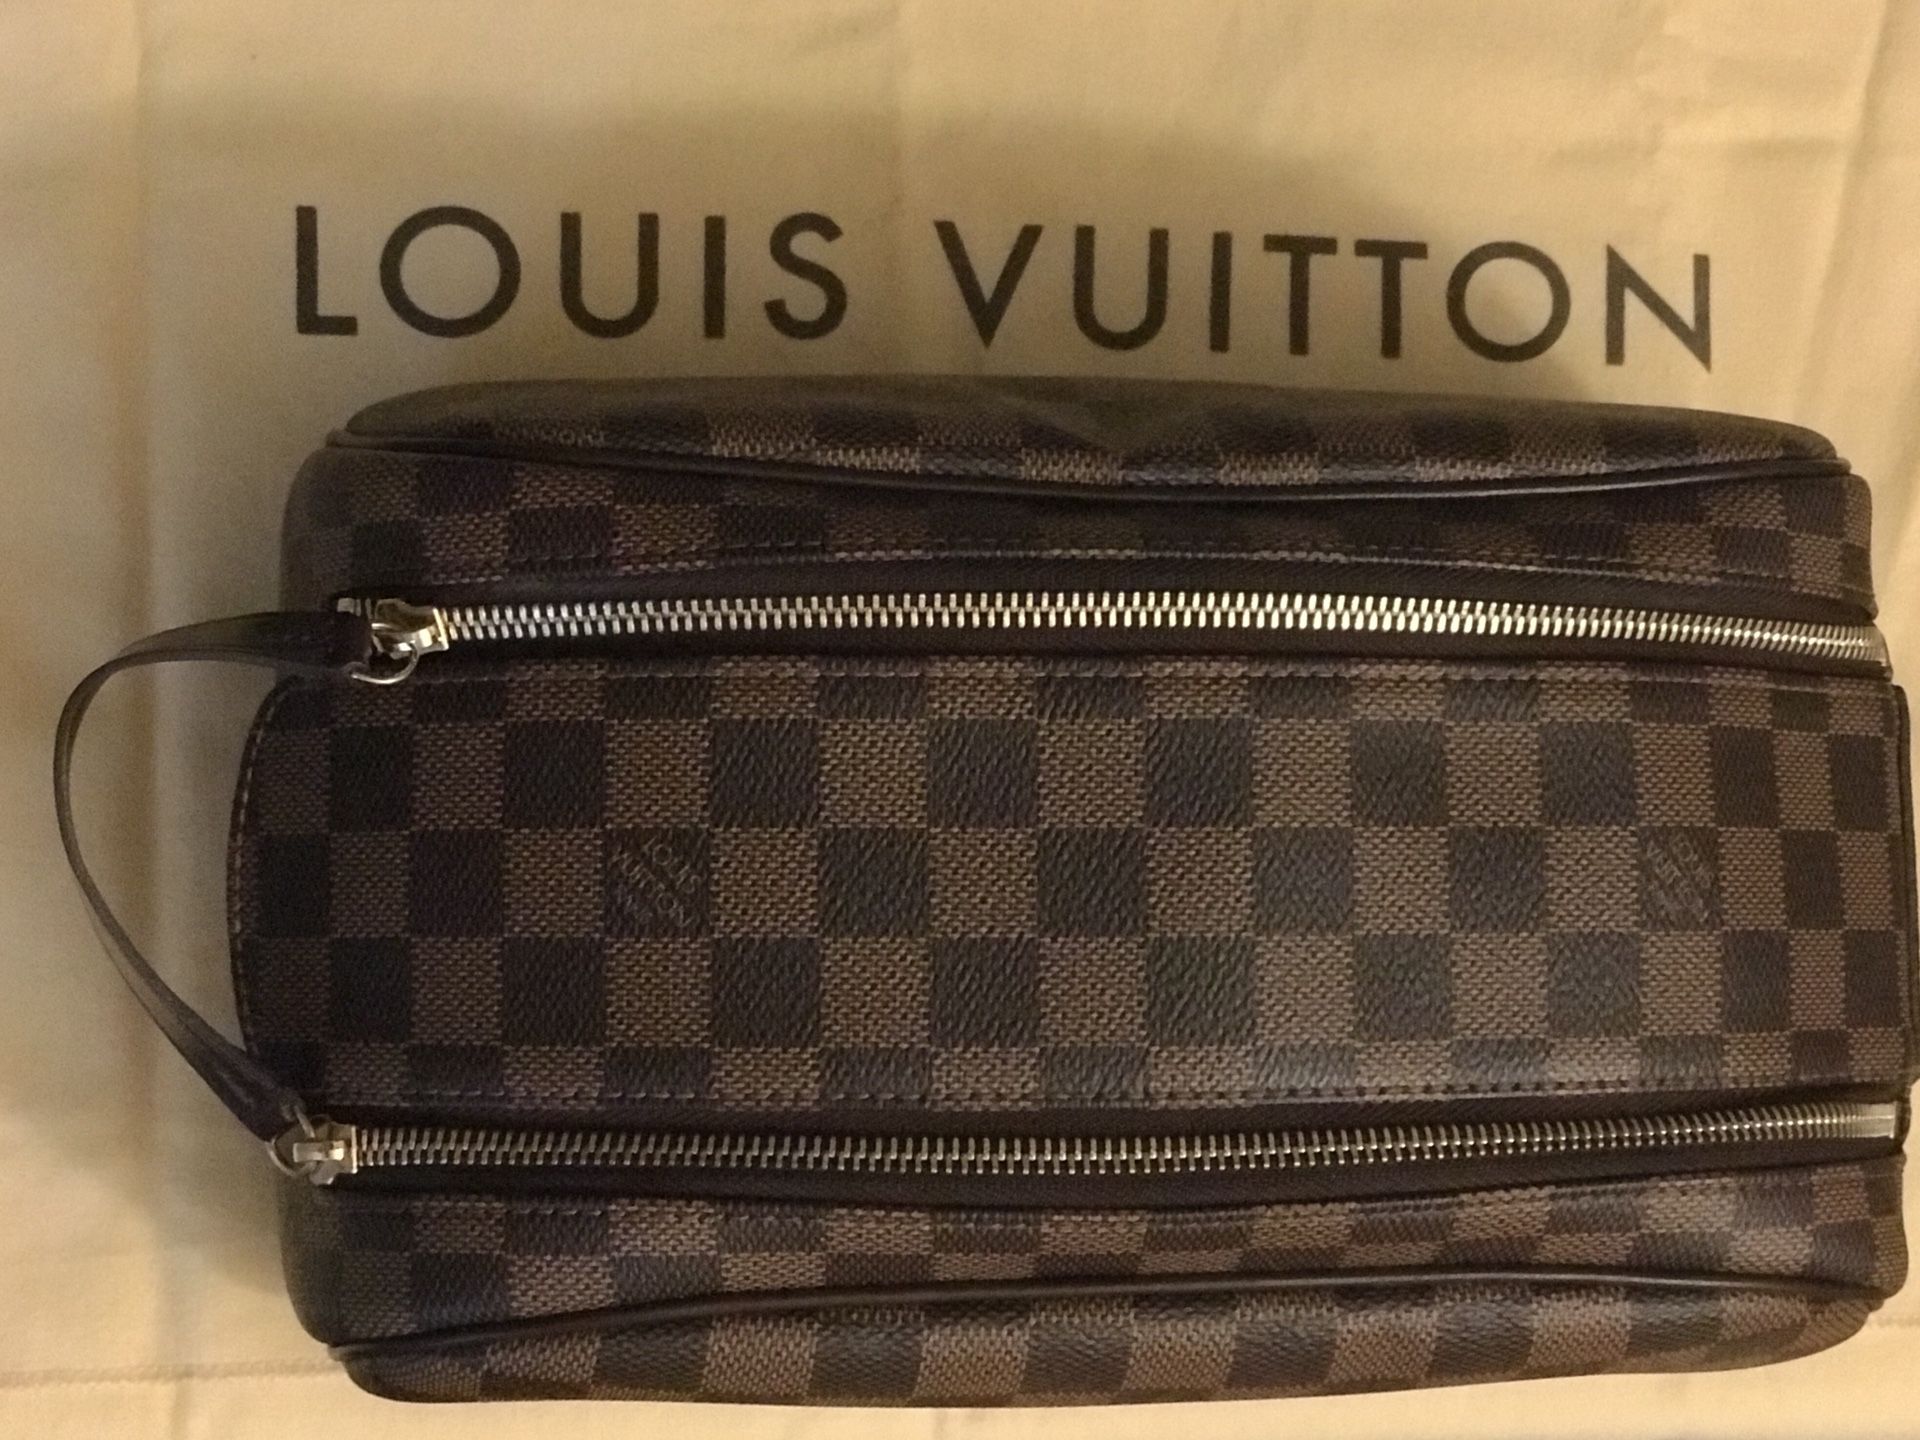 Louis Vuitton king size toiletry, what fits inside